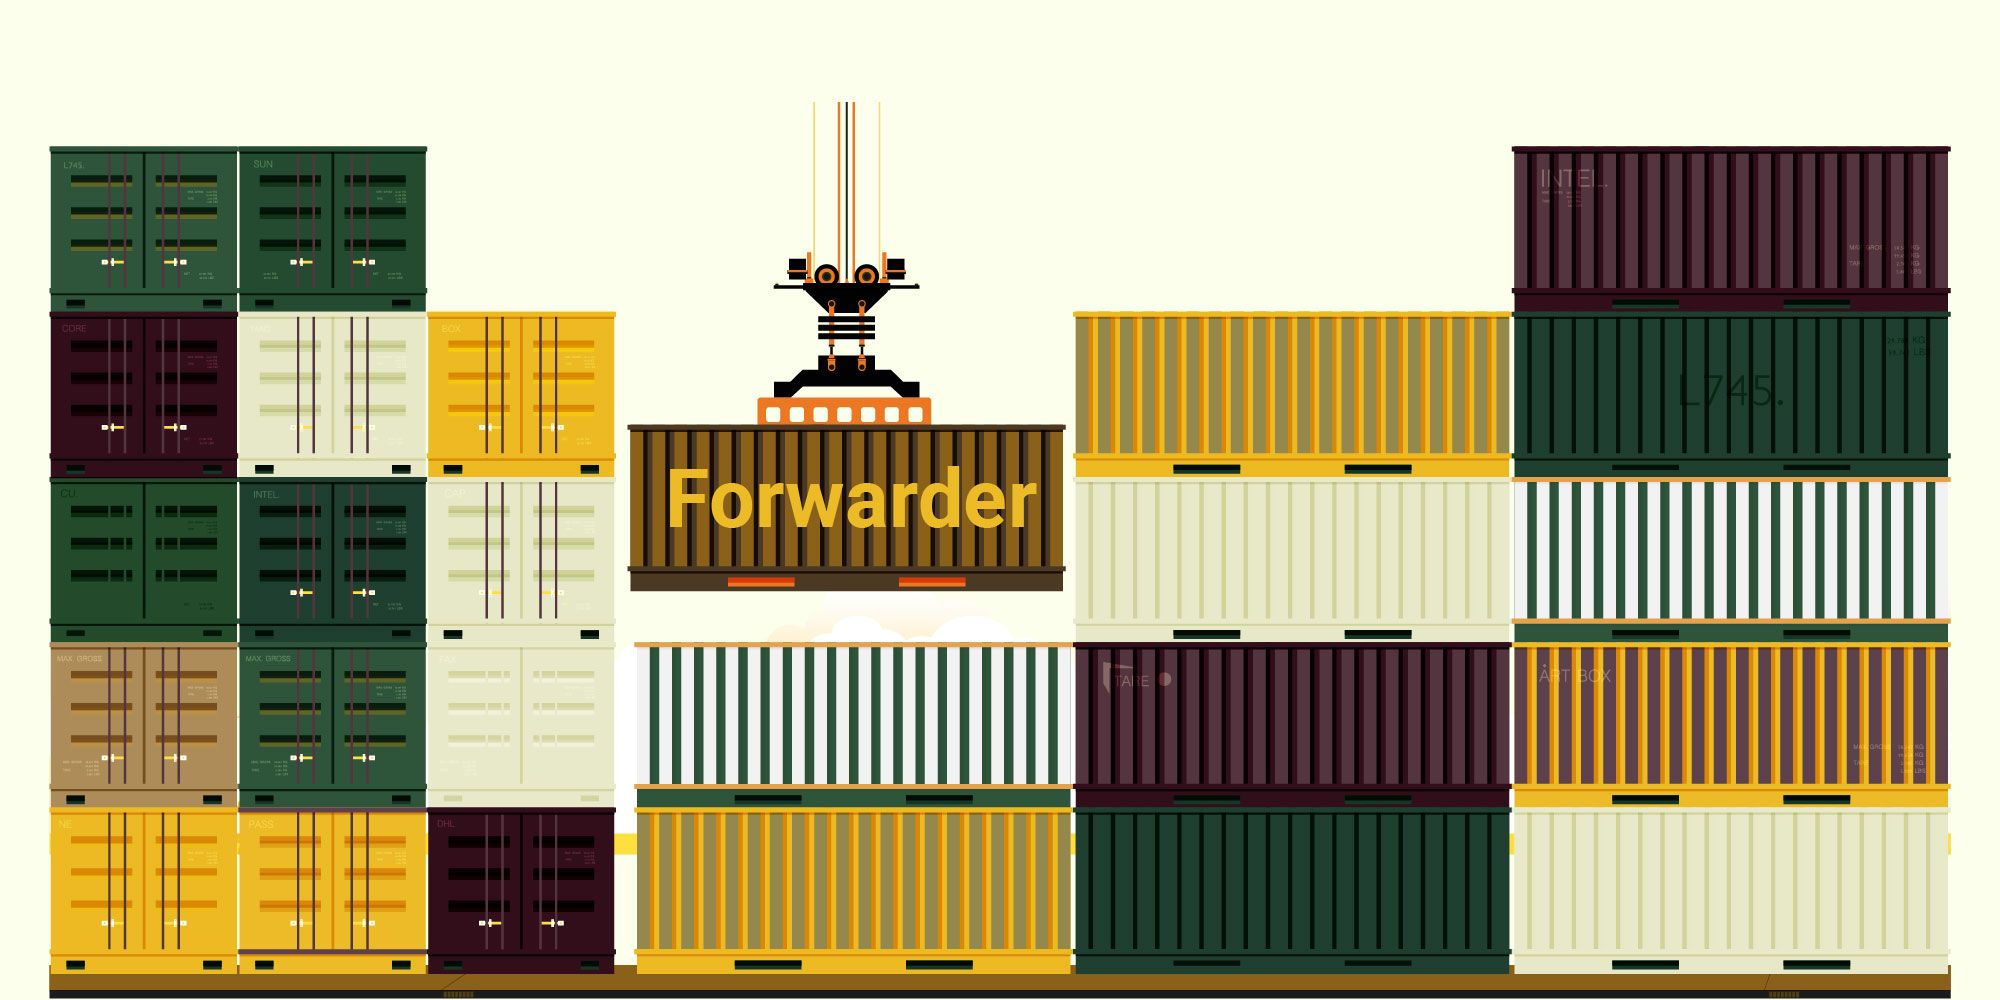 Freight forwarder graphic